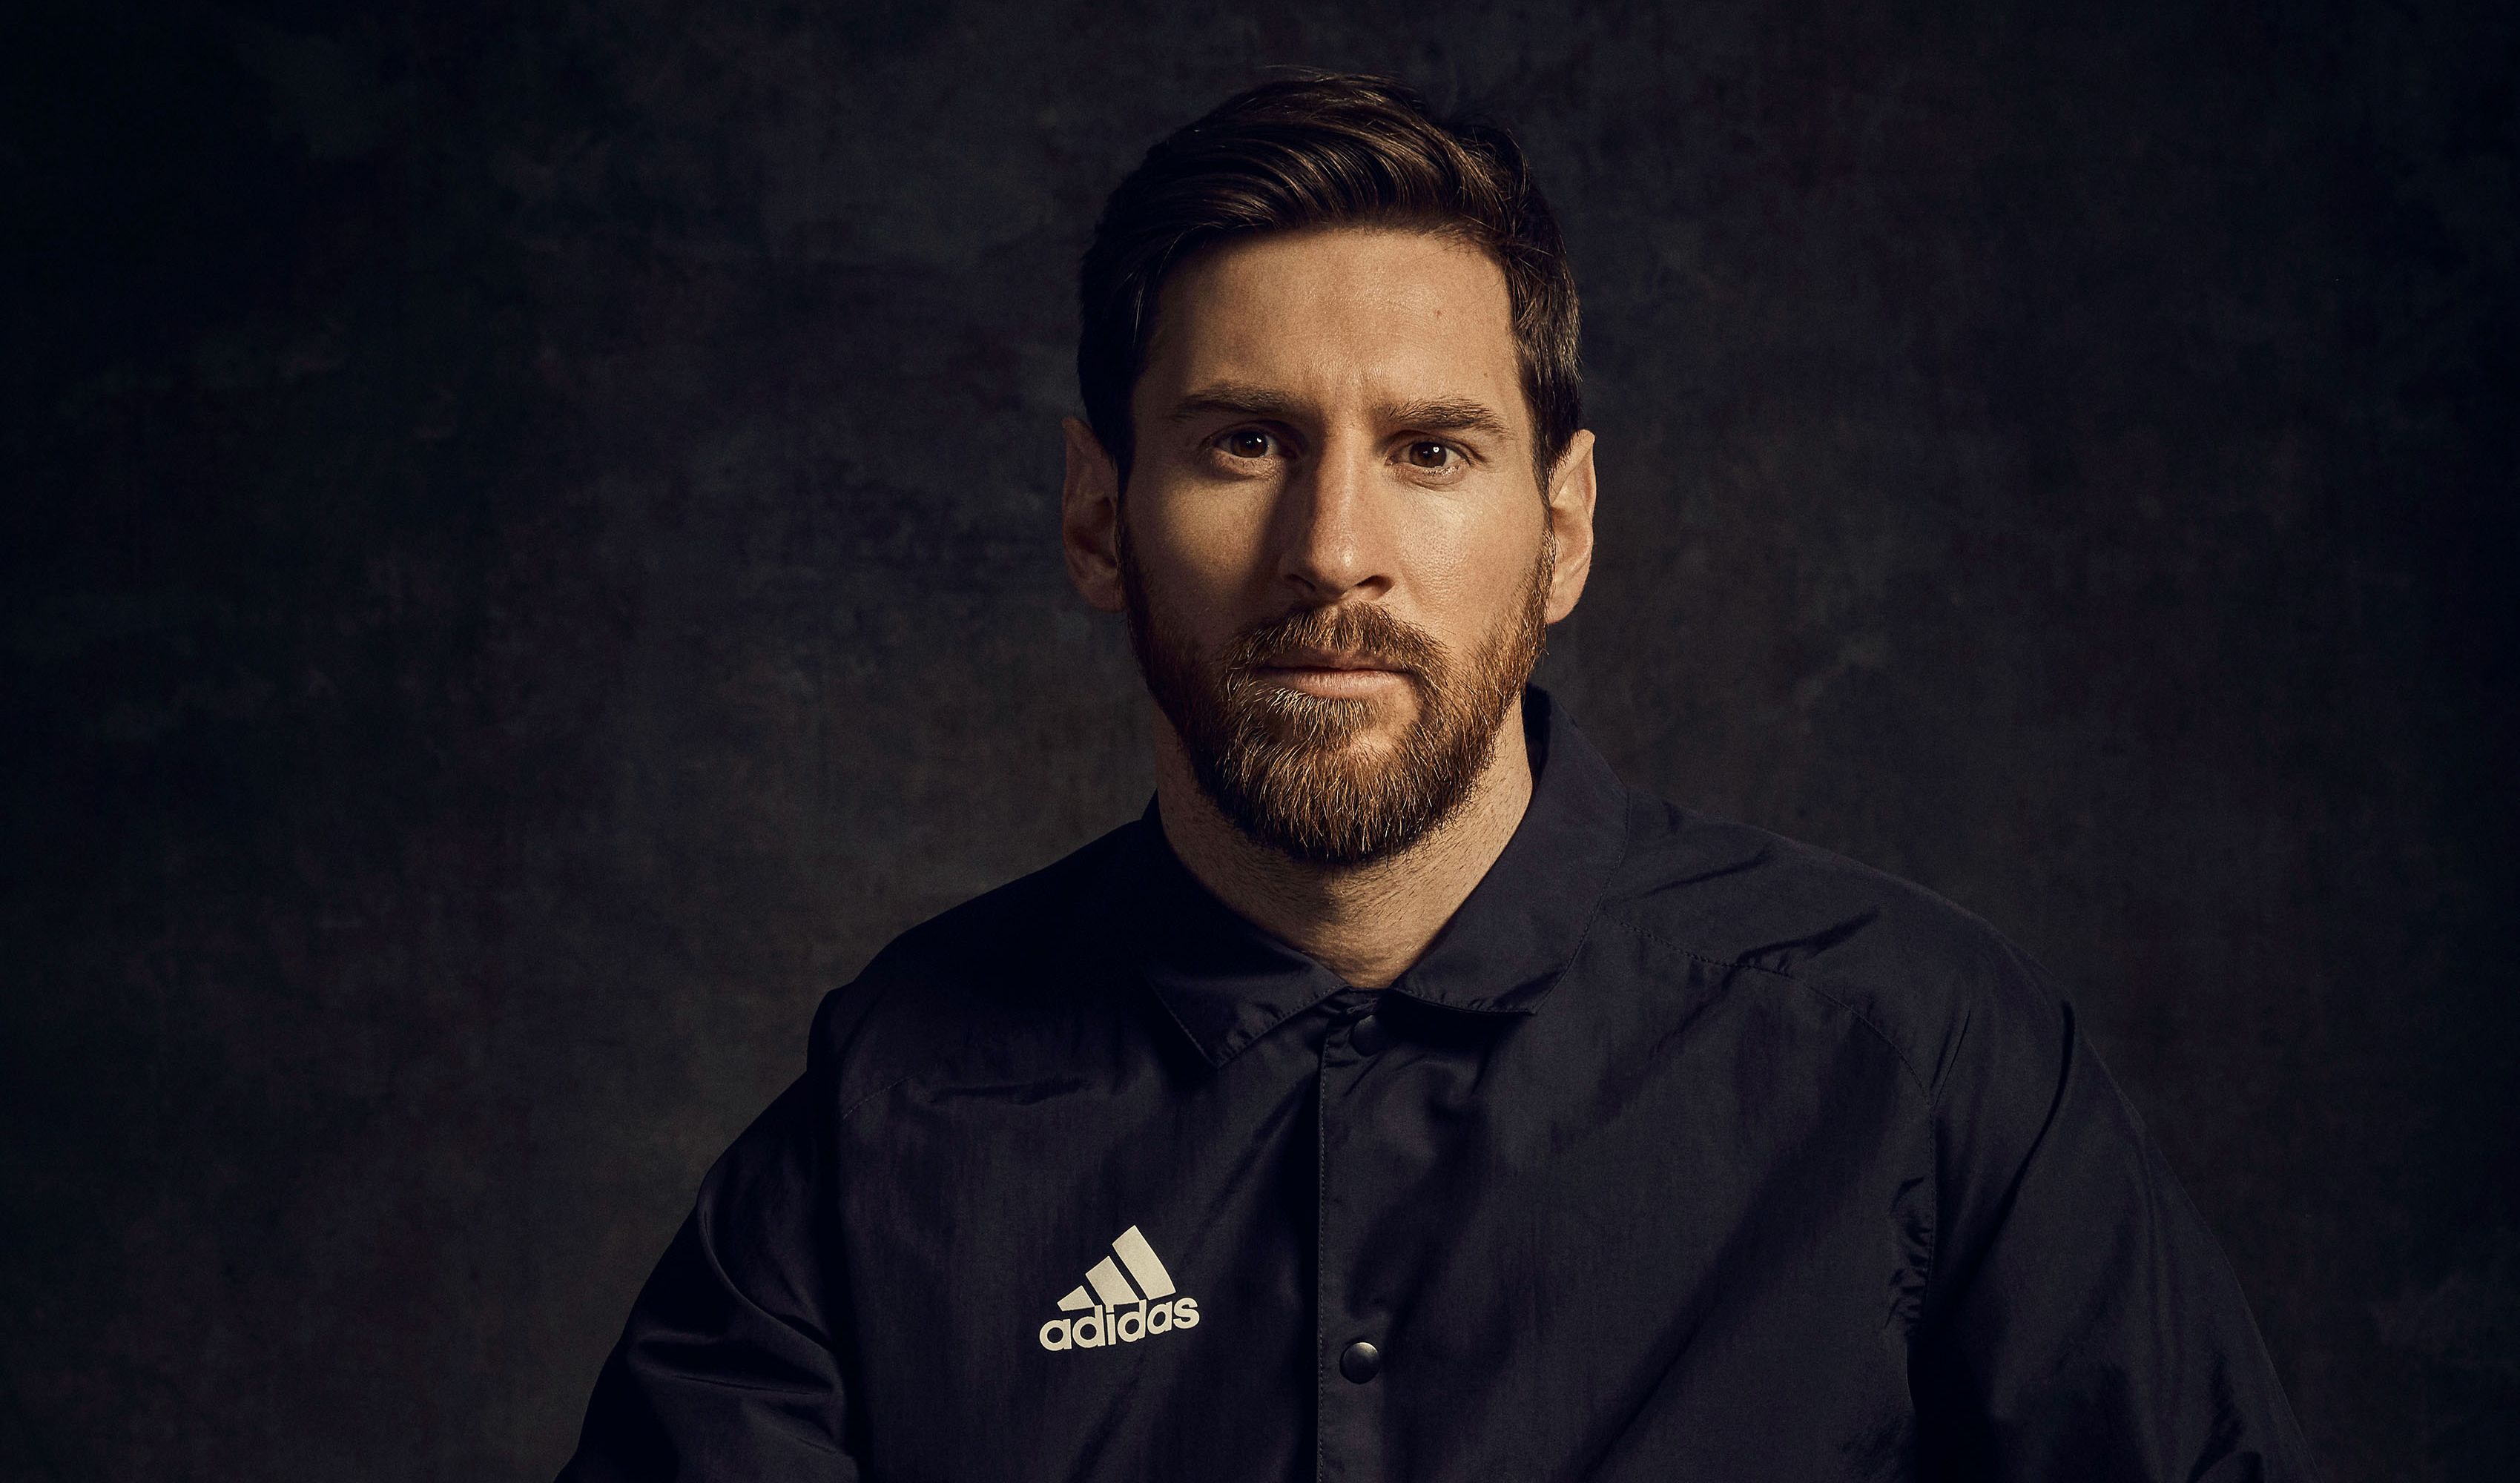 Football player Lionel Messi in a black shirt with a beard wallpaper and image, picture, photo